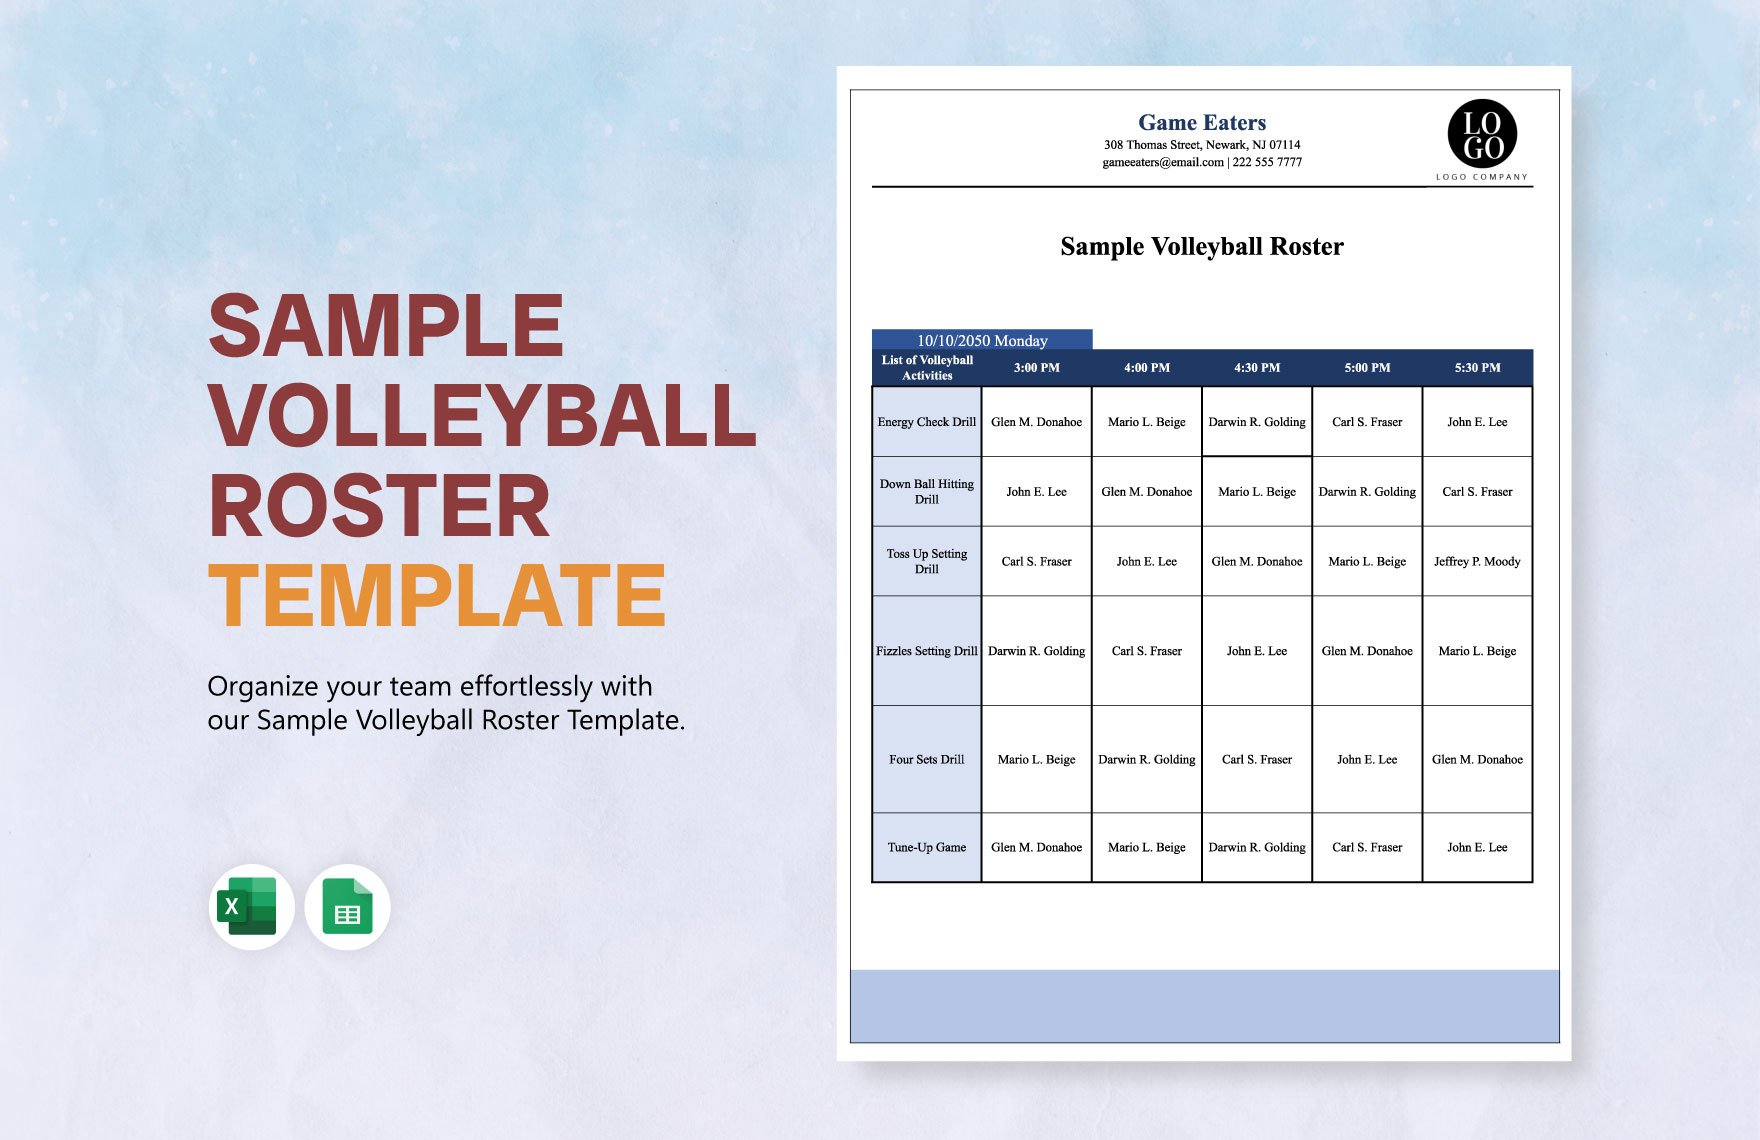 Sample Volleyball Roster in Excel, Google Sheets